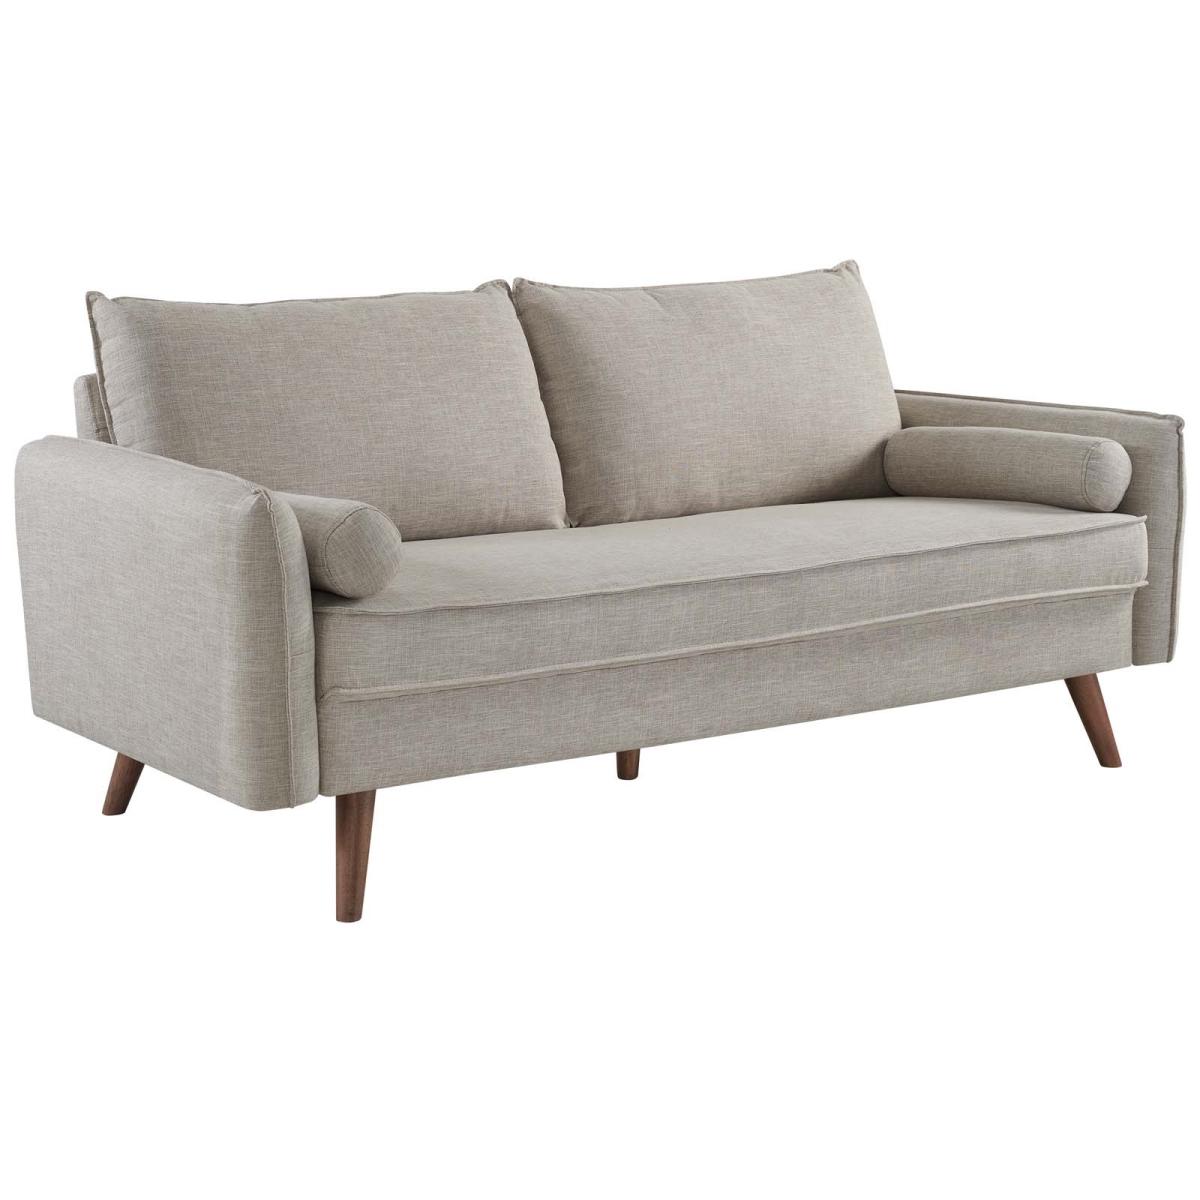 Eei-3092-bei Revive Upholstered Fabric Sofa - Beige, 33.5 X 72 X 32.5 In.